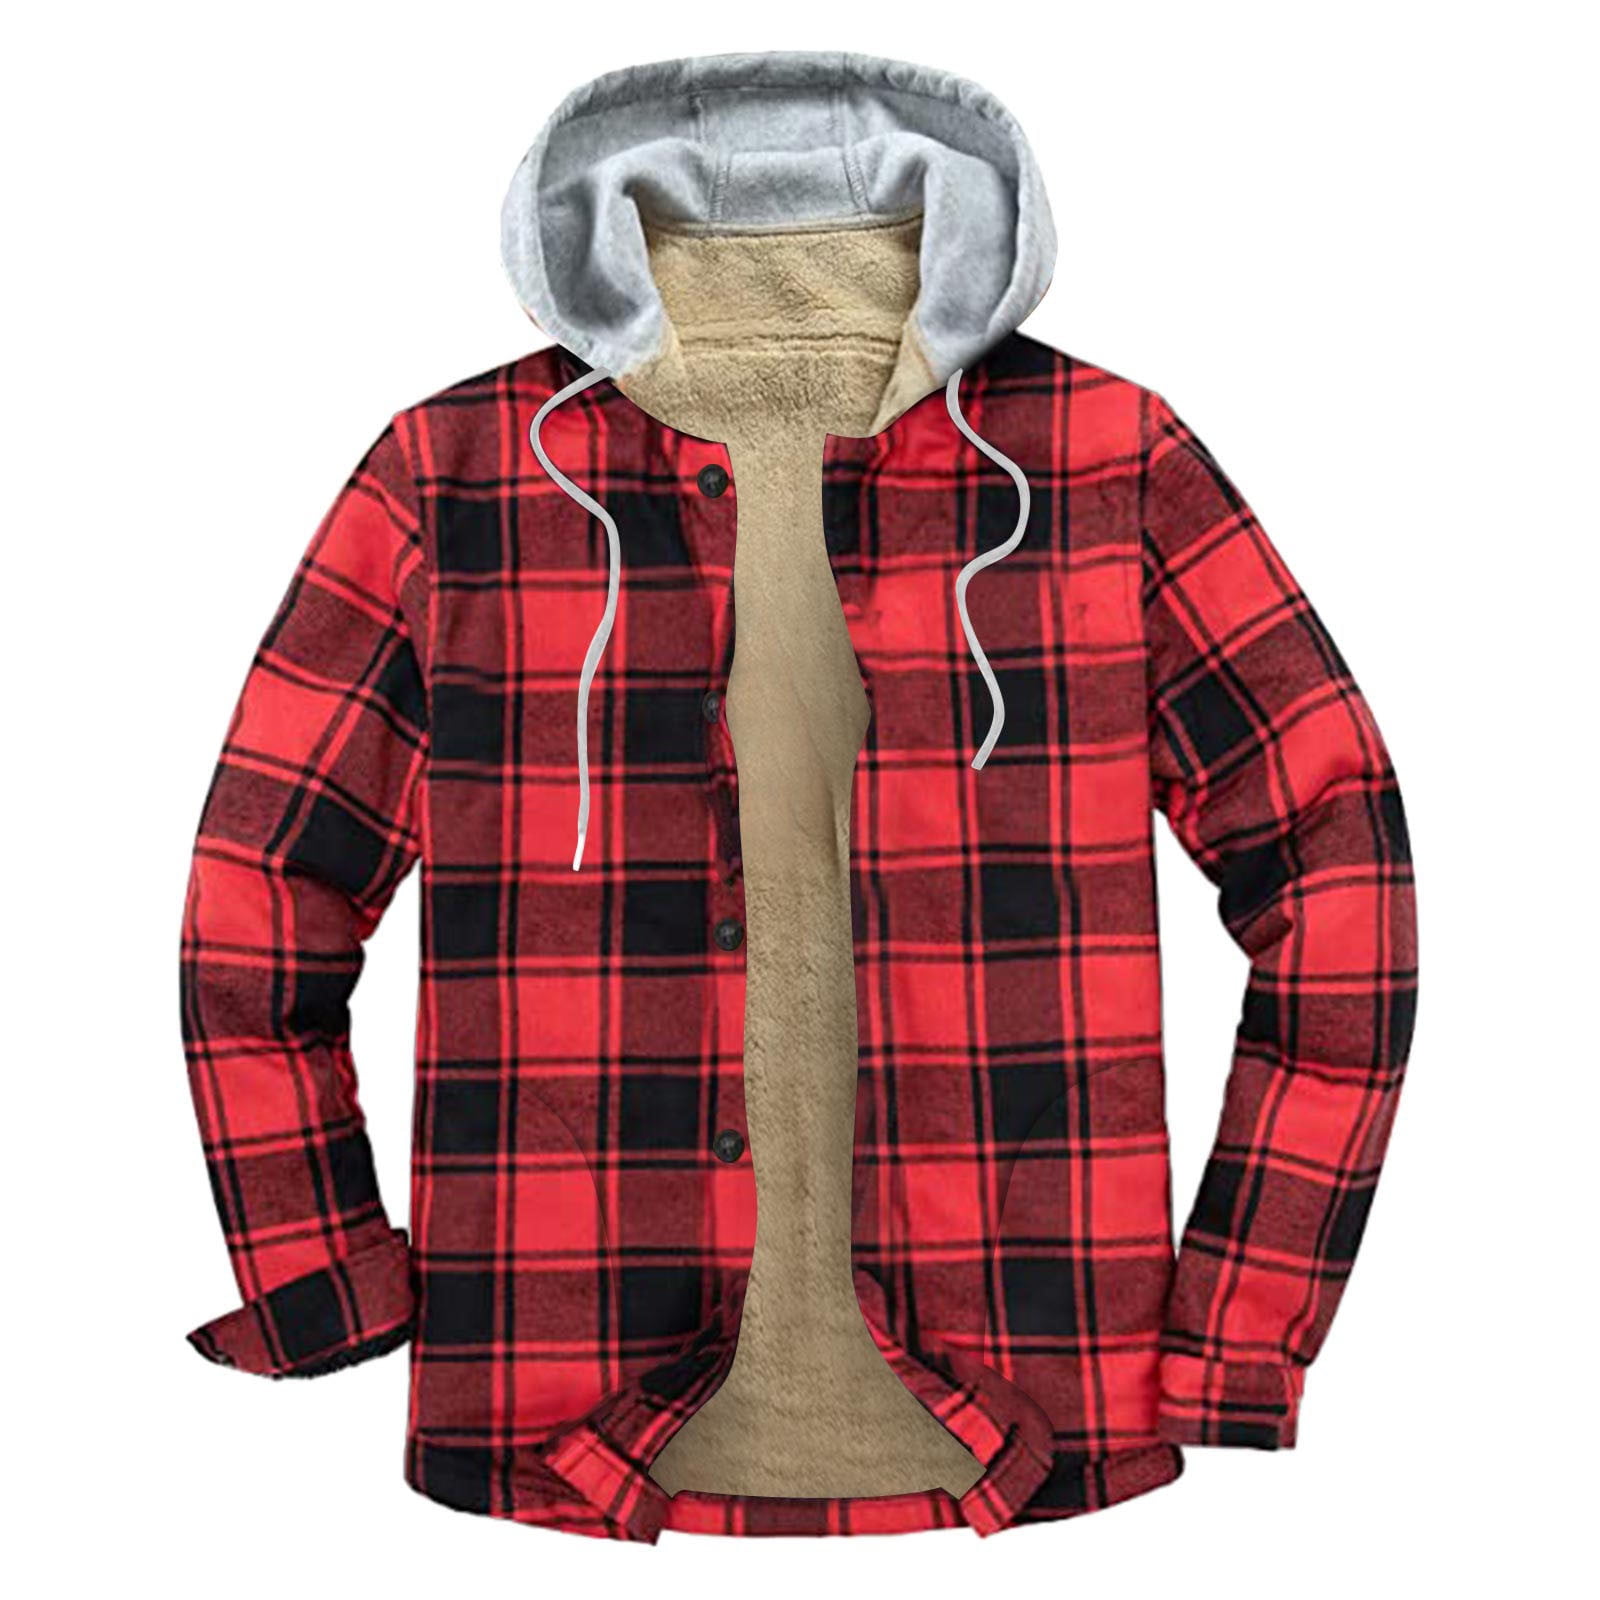 Hooded Plaid Jacket Men,Men's Long Sleeve Quilted Lined Flannel Shirt ...